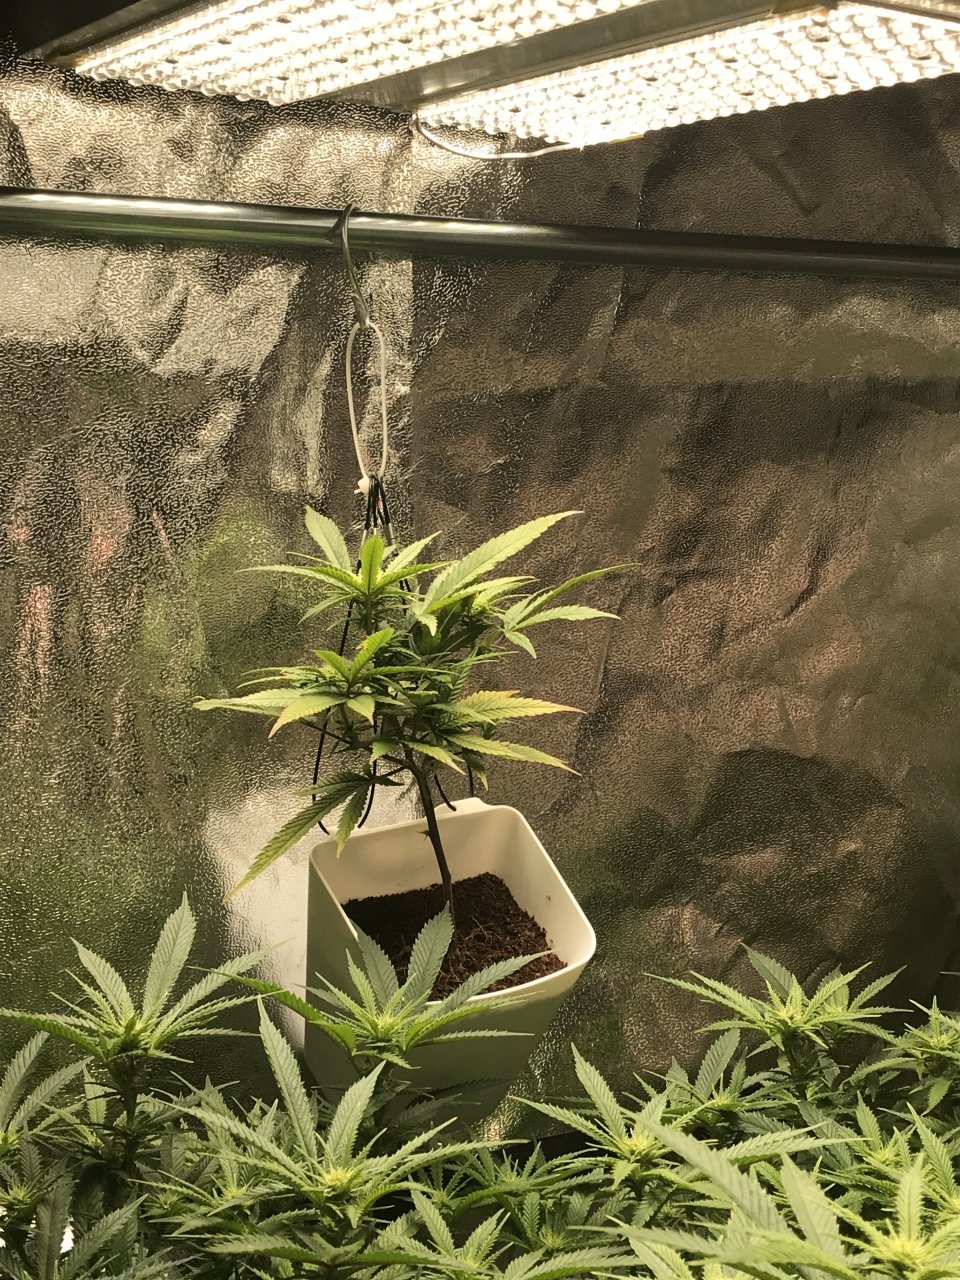 16th Day of 12:12 QuadSide of the Grow Balcony VIP at 1600PPFD.JPG